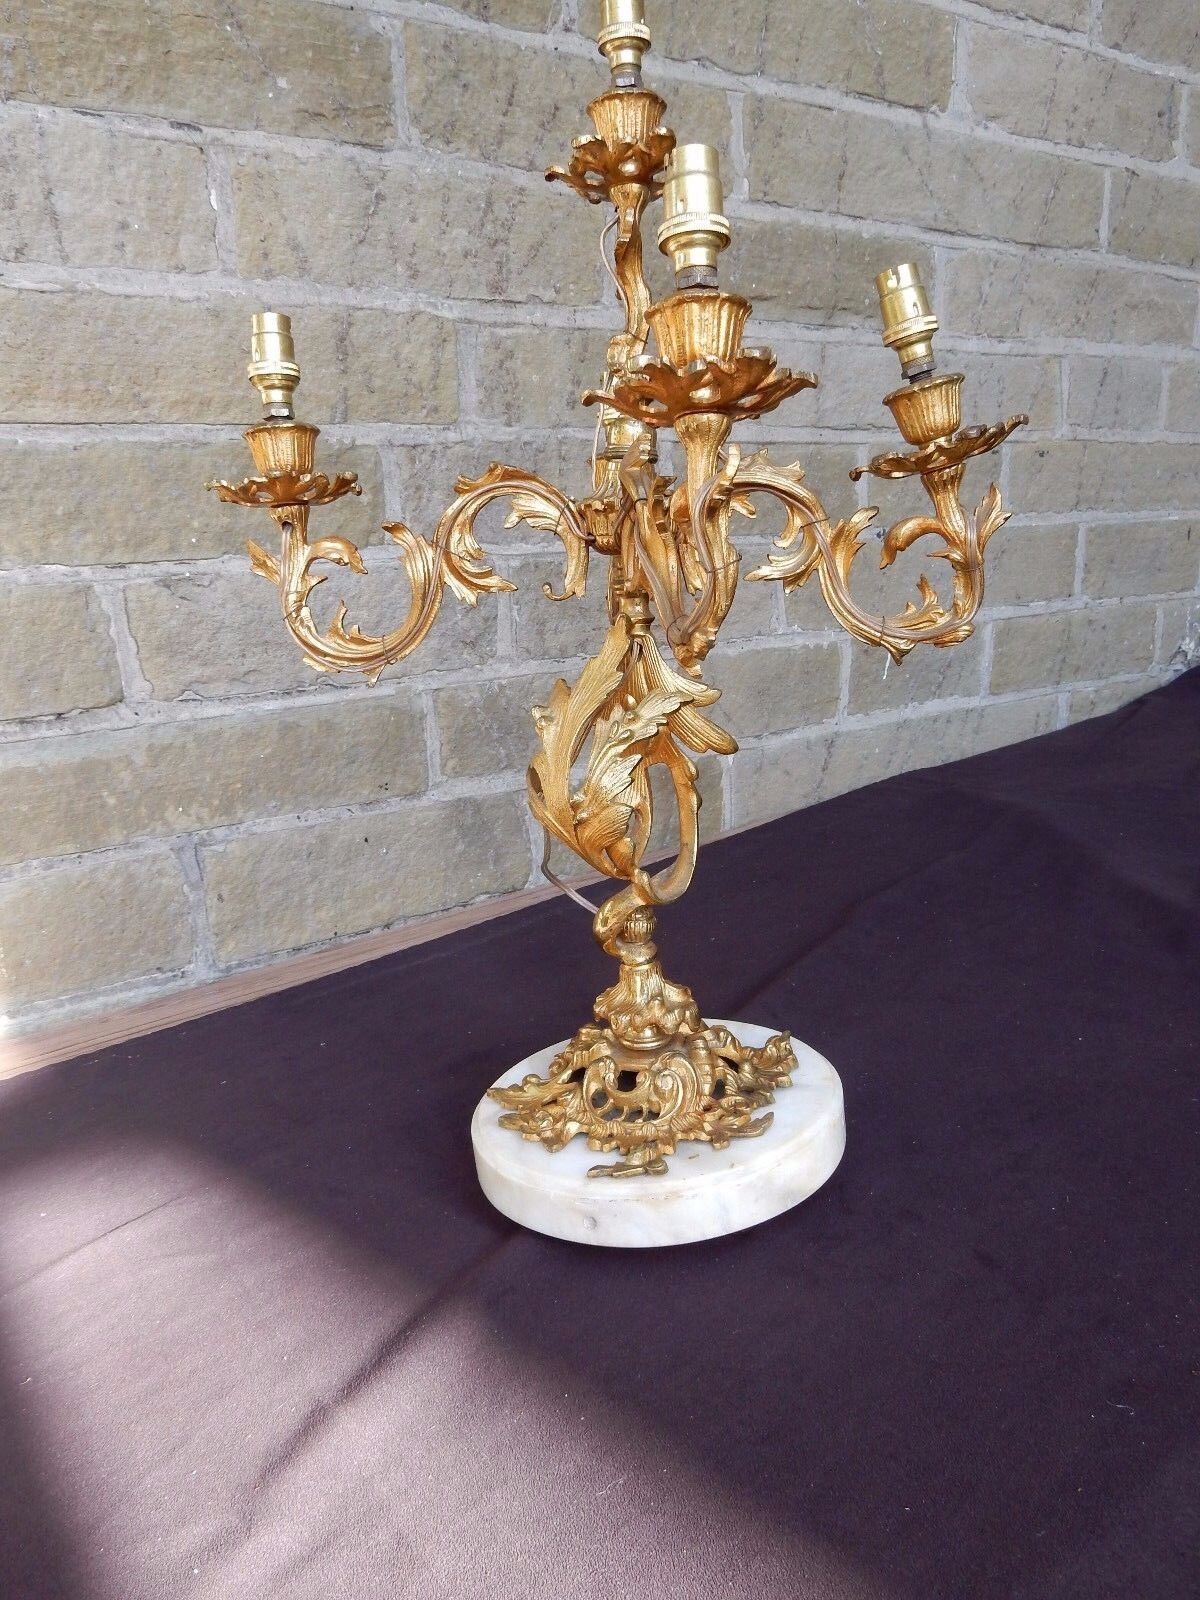 MAGNIFICENT EARLY 20TH C ORMOLU LAMP  WITH MARBLE BASE TO REWIRE   -